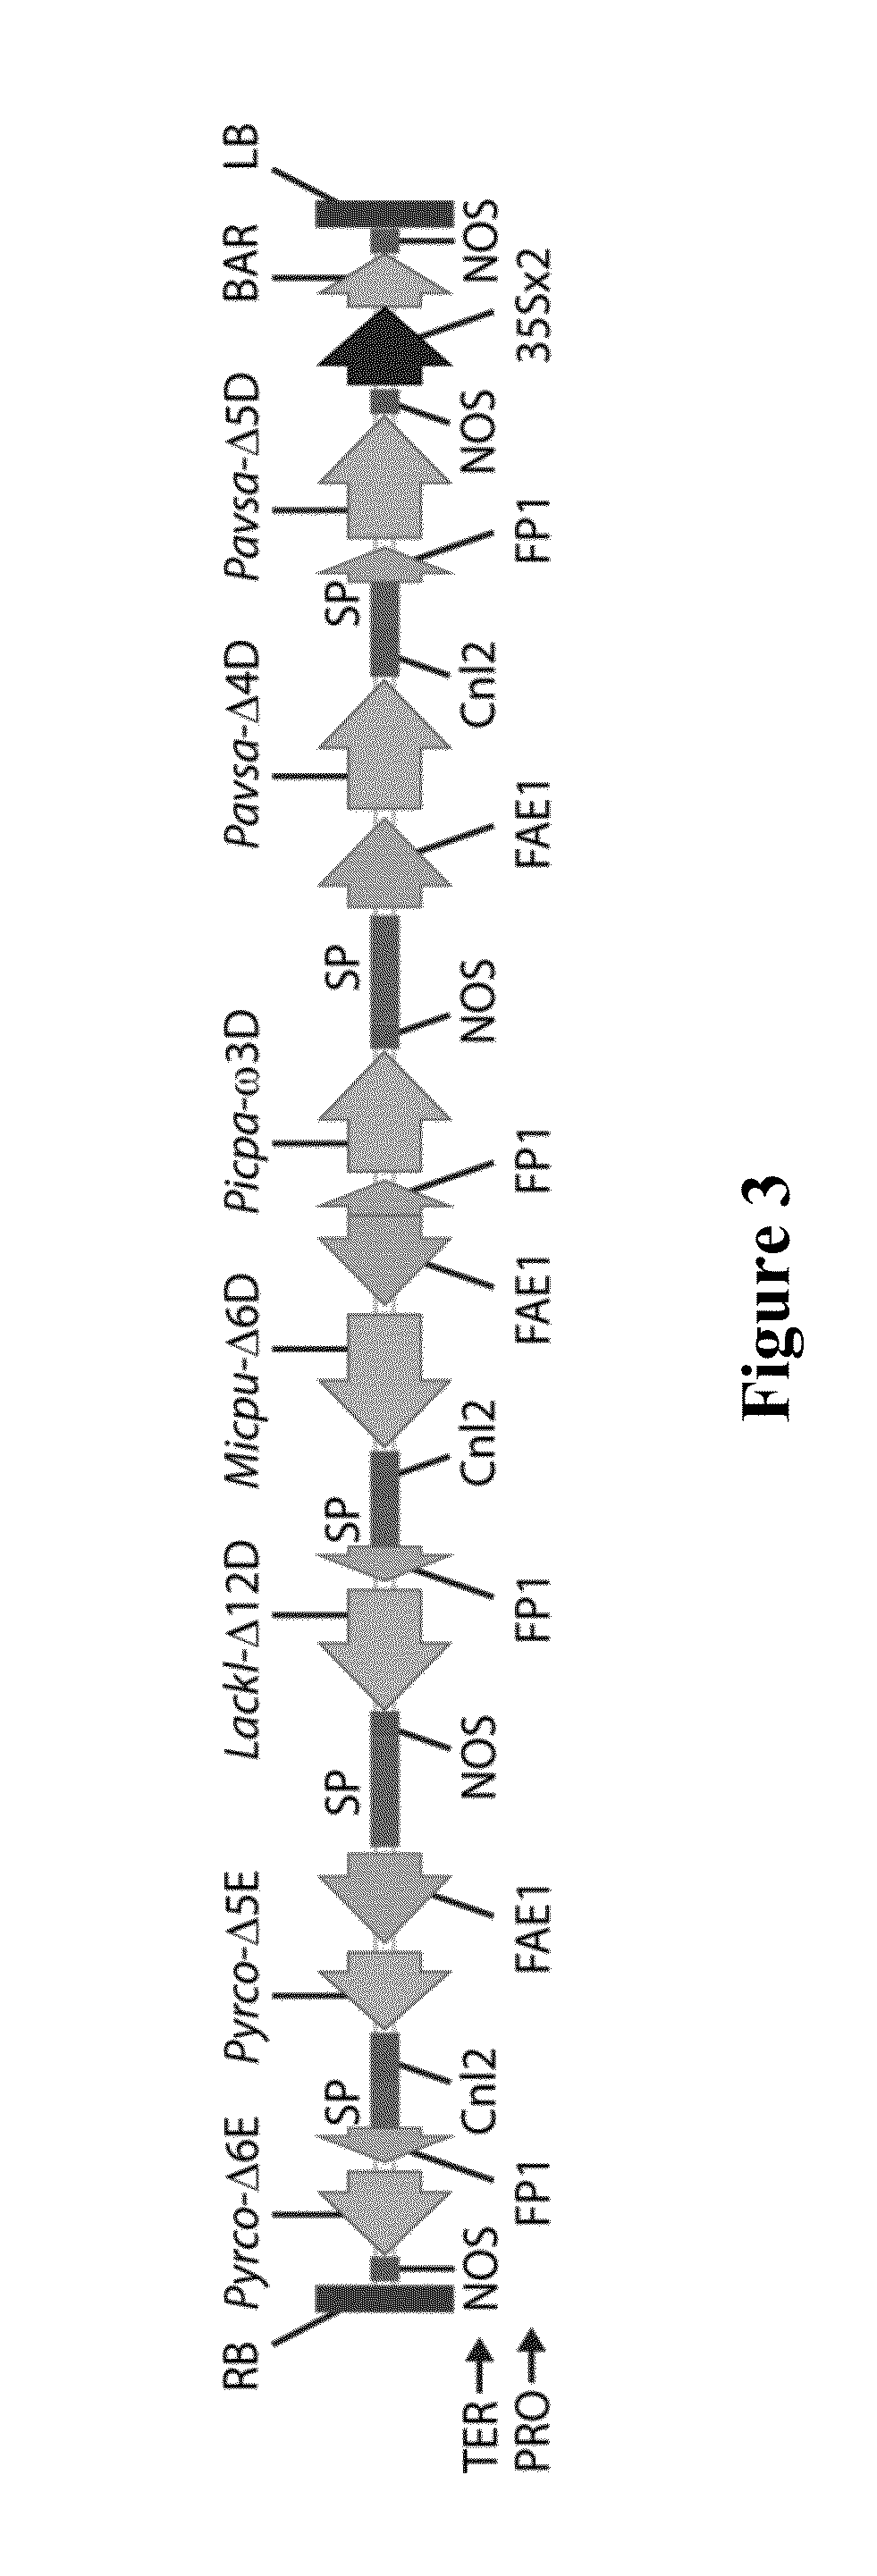 Process for producing ethyl esters of polyunsaturated fatty acids